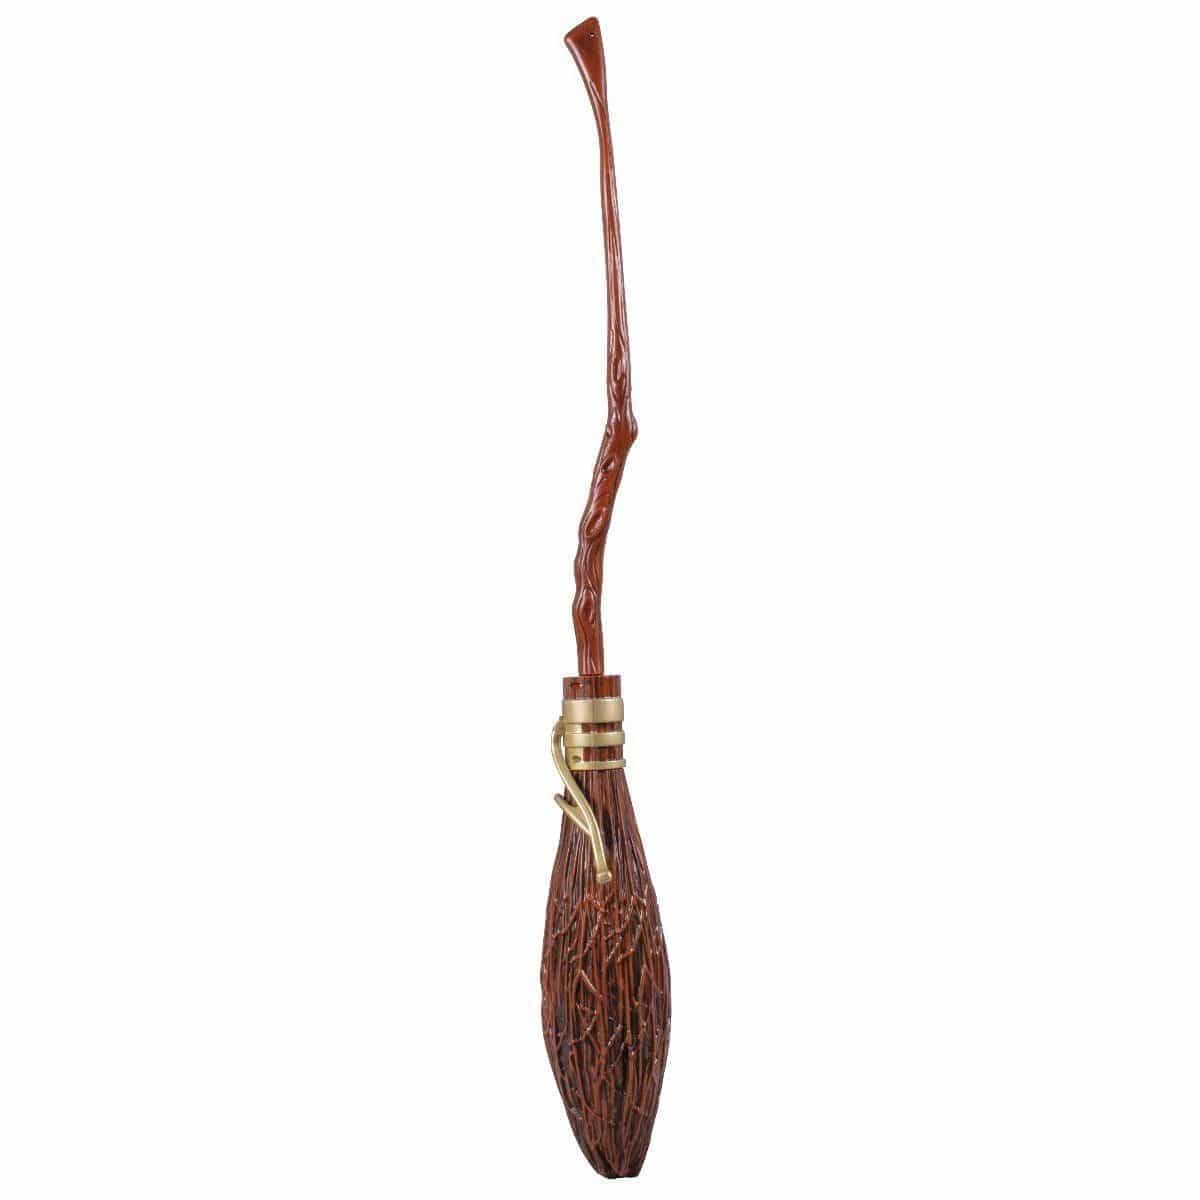 Buy Costume Accessories Nimbus 2000 Quidditch Broom, Harry Potter sold at Party Expert